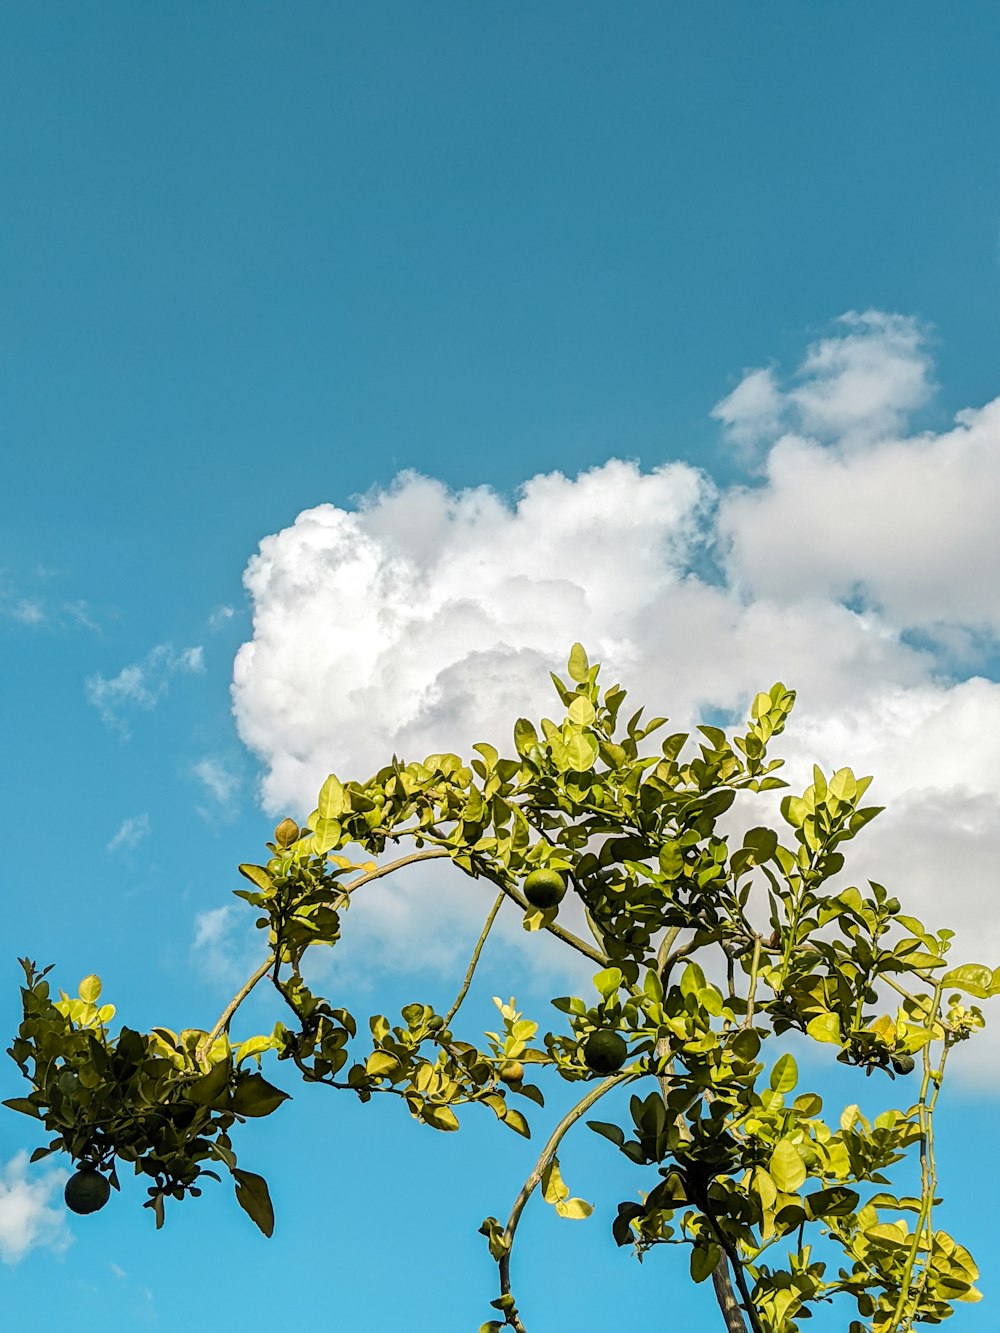 green leaved tree under blue and white sunny cloudy sky during daytime